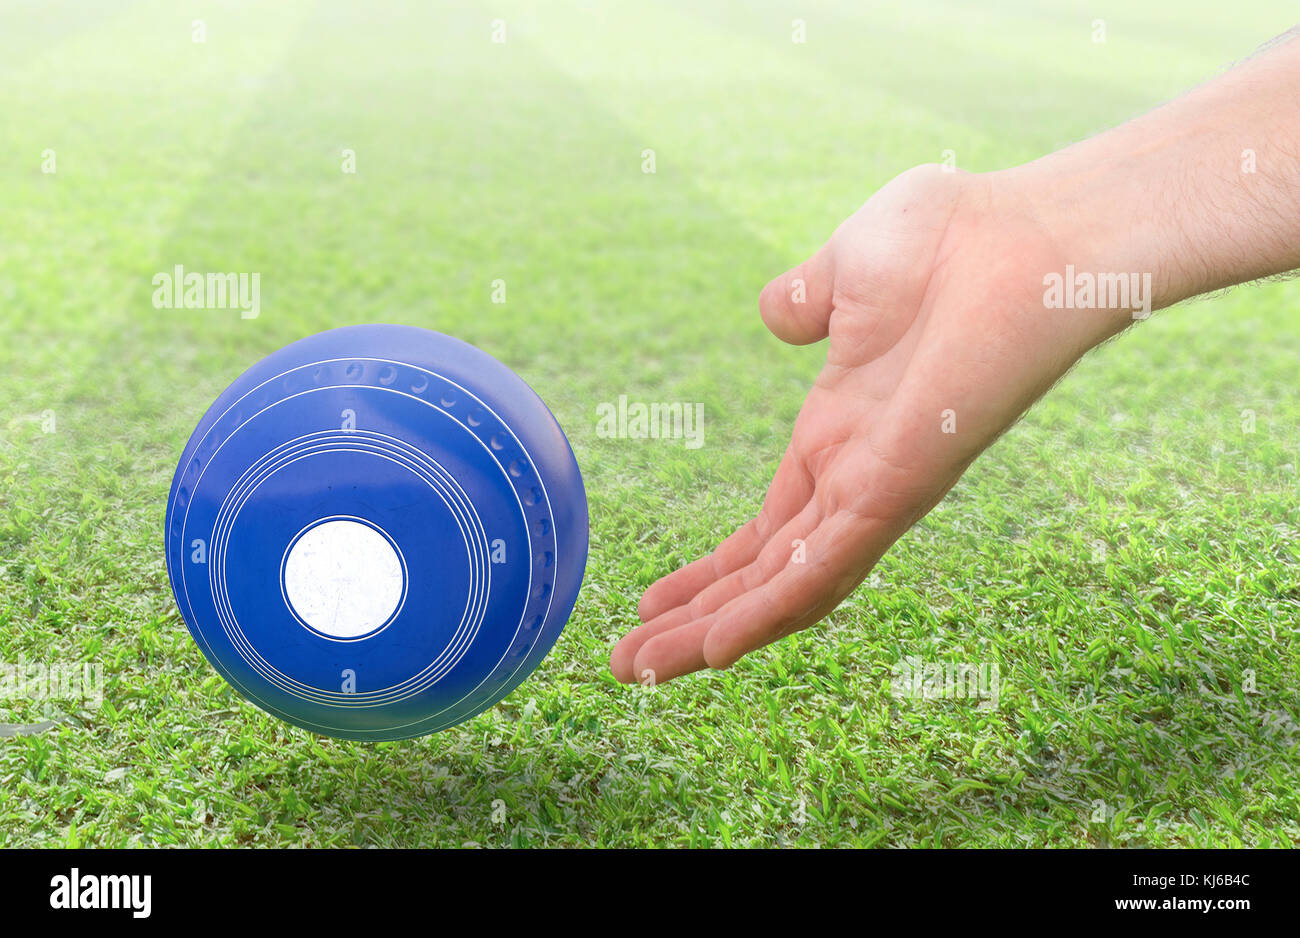 A male hand bowling and releasing a blue wooden lawn bowling ball on a green lawn grass surface -3D render Stock Photo